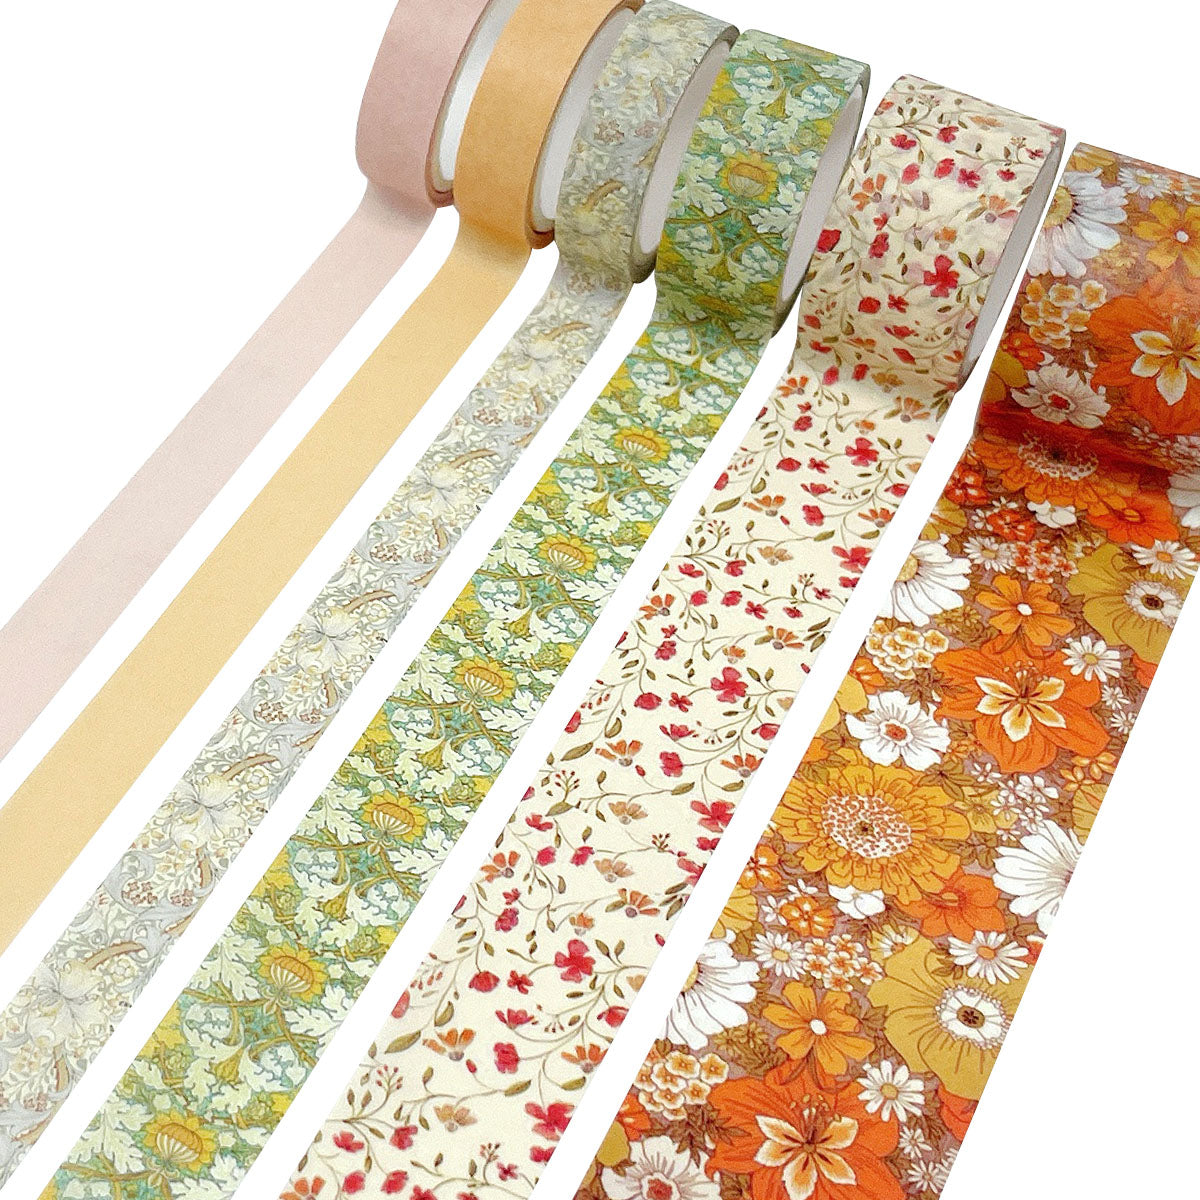 Wrapables Decorative Washi Tape Box Set for DIY Arts & Crafts,  Scrapbooking, Diary, Stationery, Card-Making, Gift Wrapping (12 Rolls),  Floral